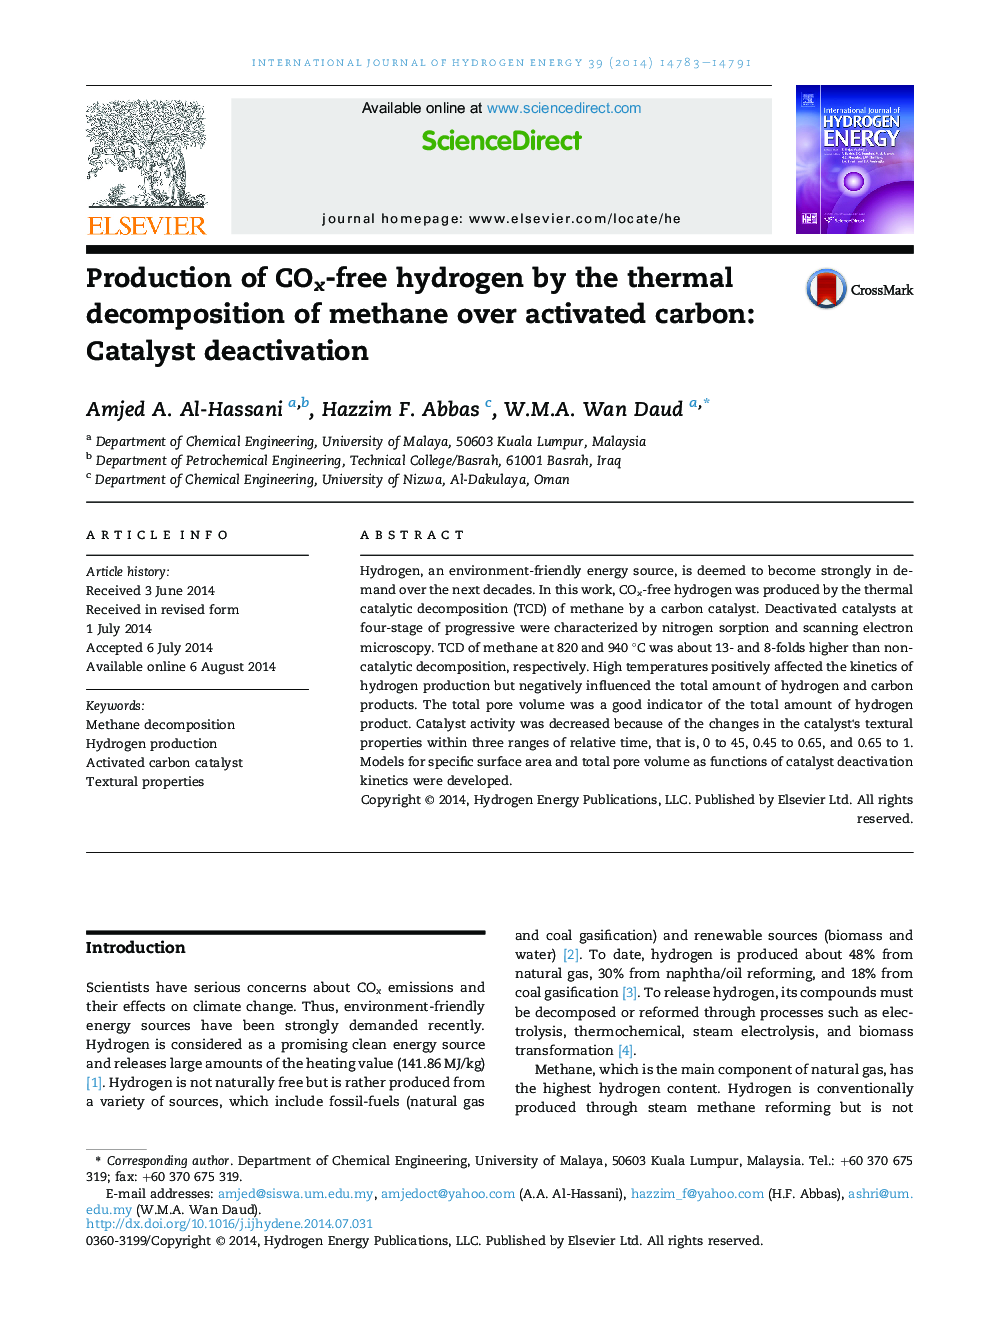 Production of COx-free hydrogen by the thermal decomposition of methane over activated carbon: Catalyst deactivation